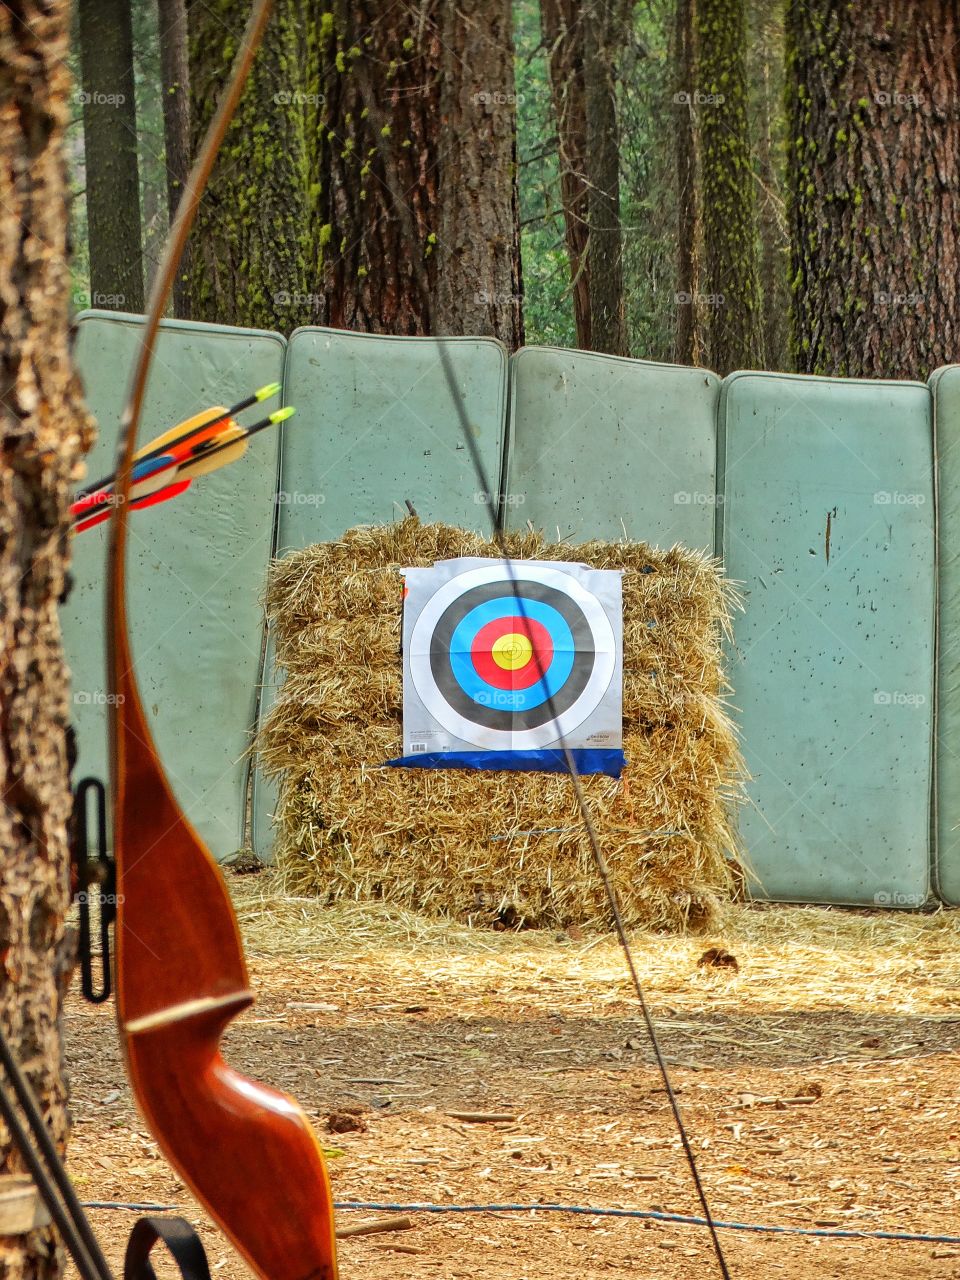 Archery Range. Bow And Arrows And An Archery Target